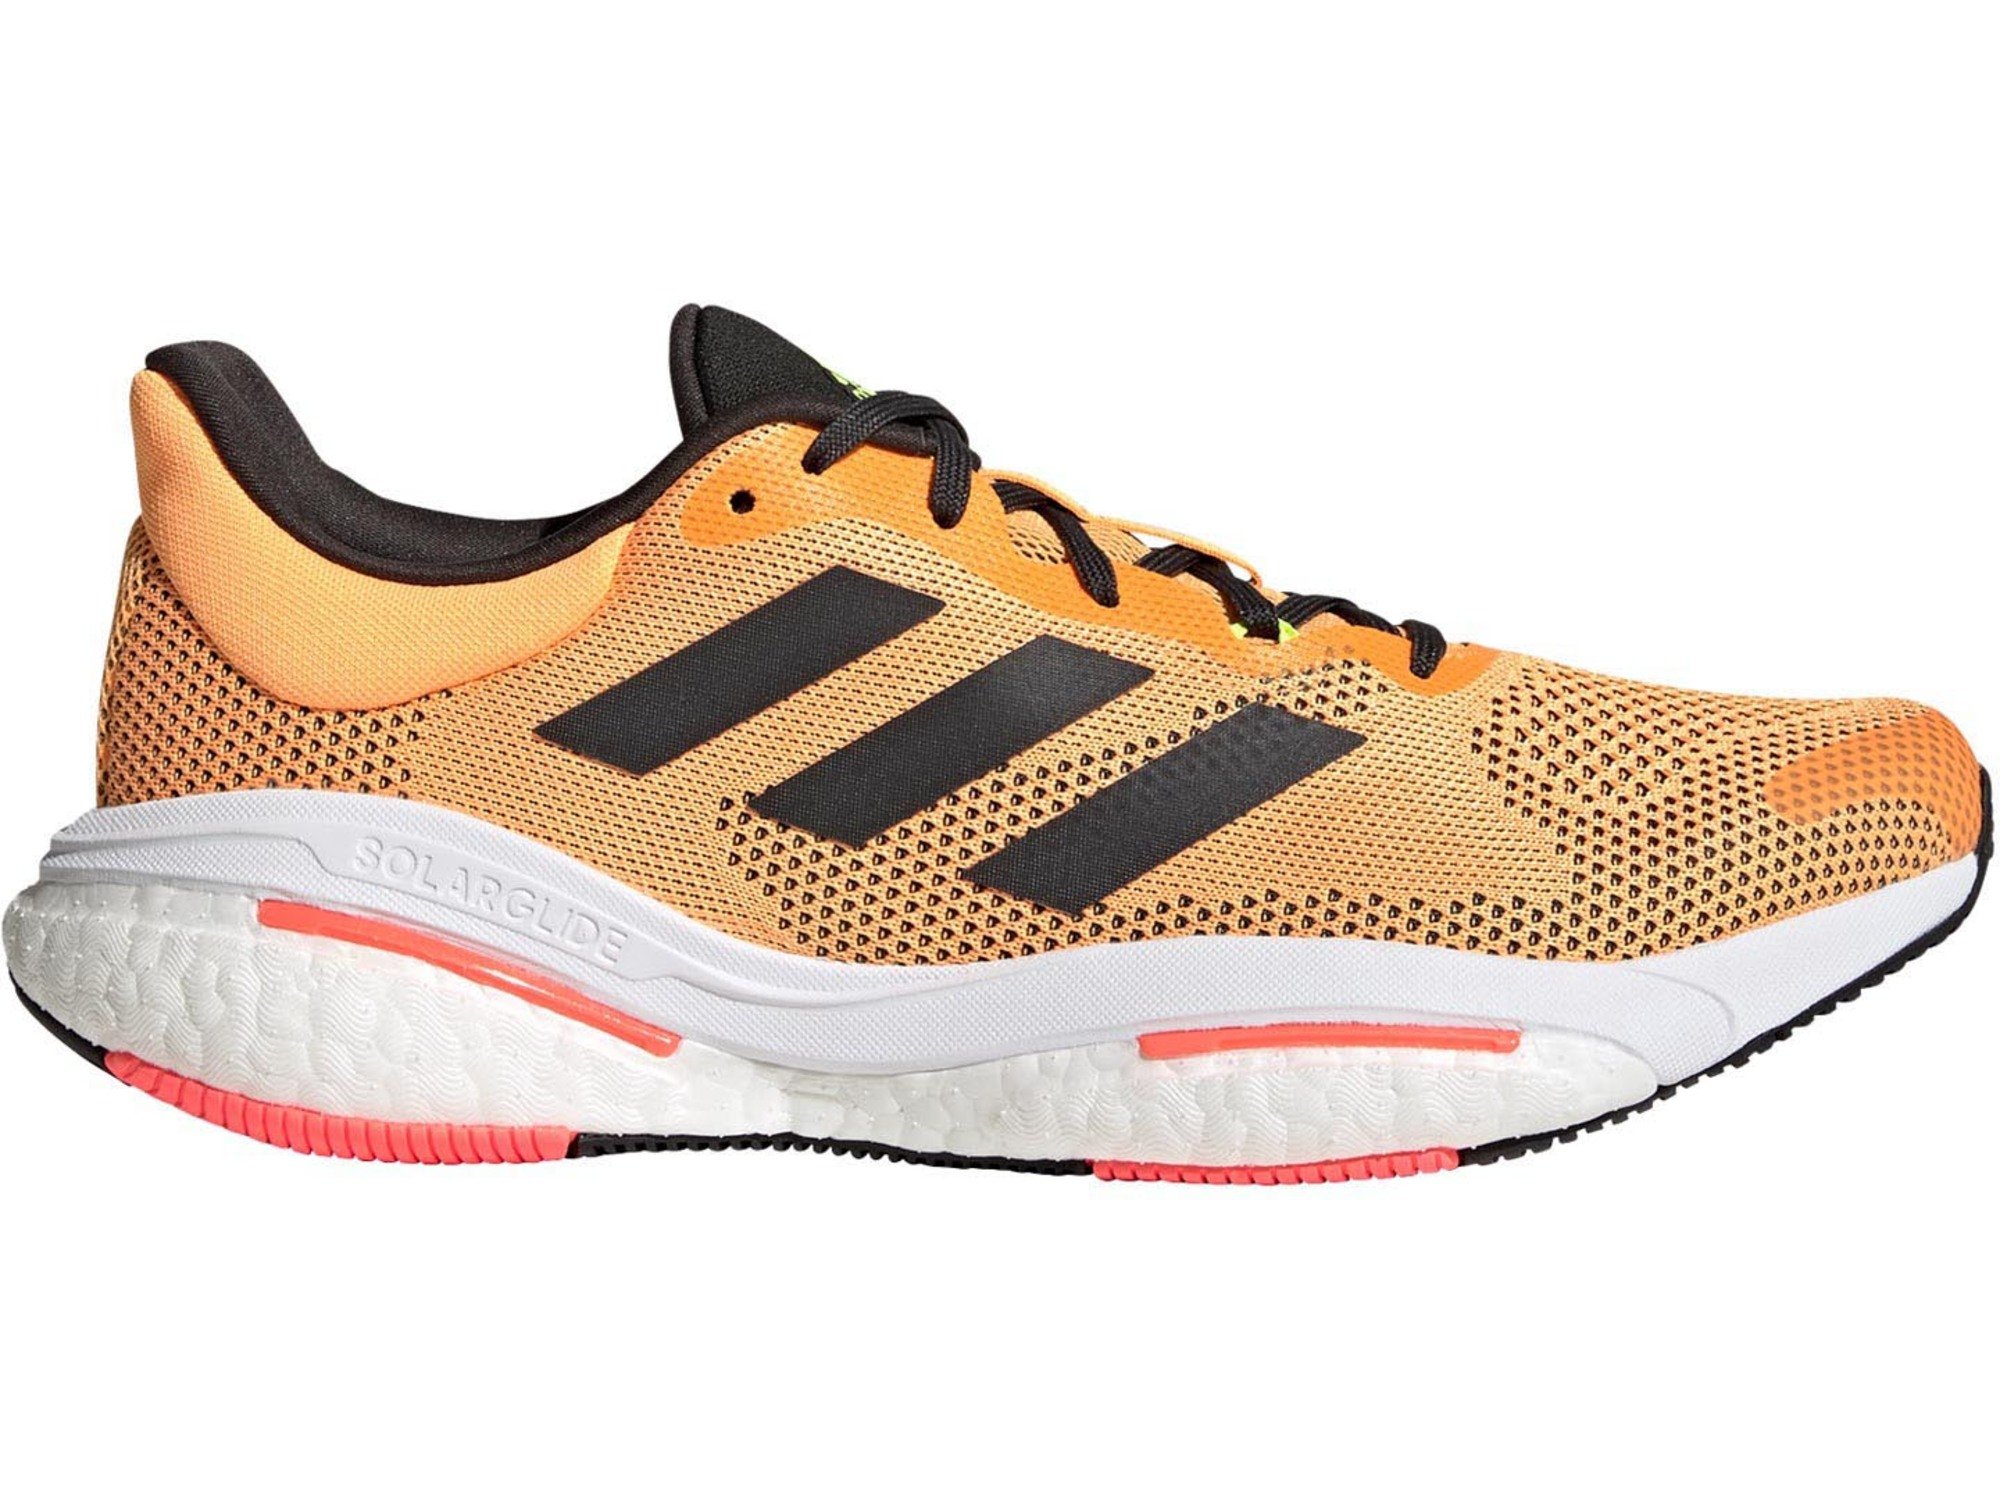 Adidas Solarglide 5 Shoes